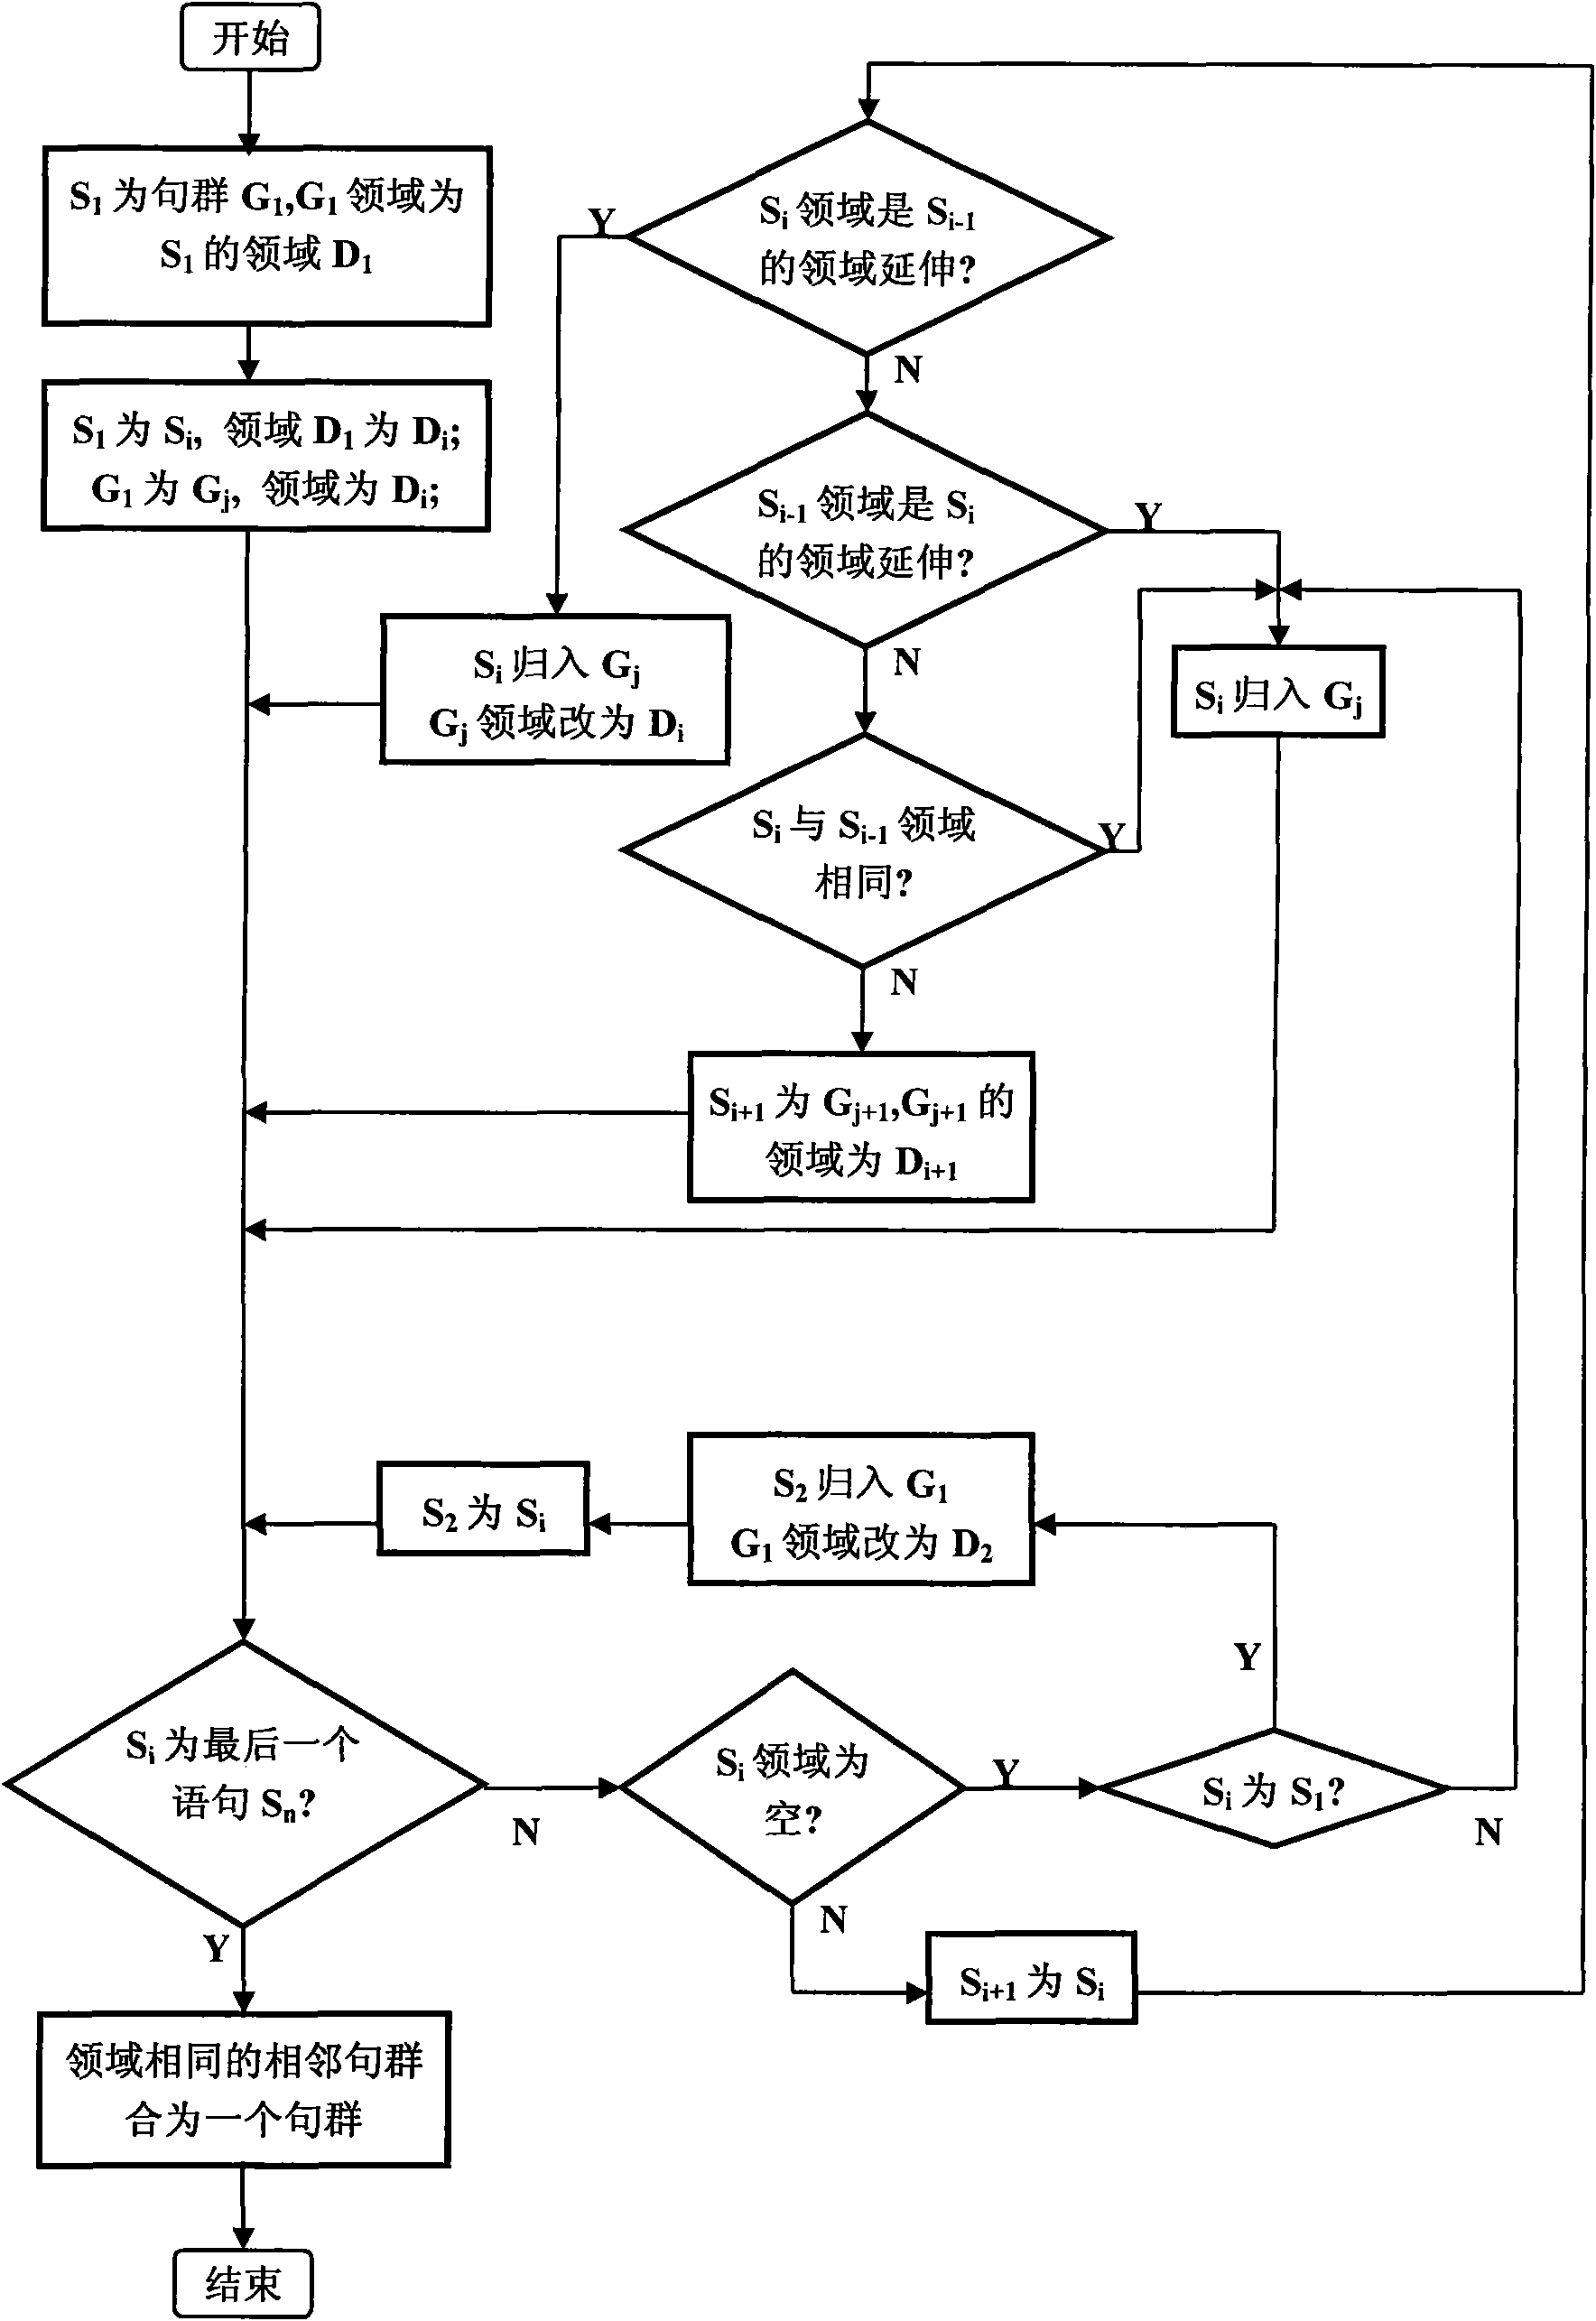 Acquisition system and method of text field based on concept symbols